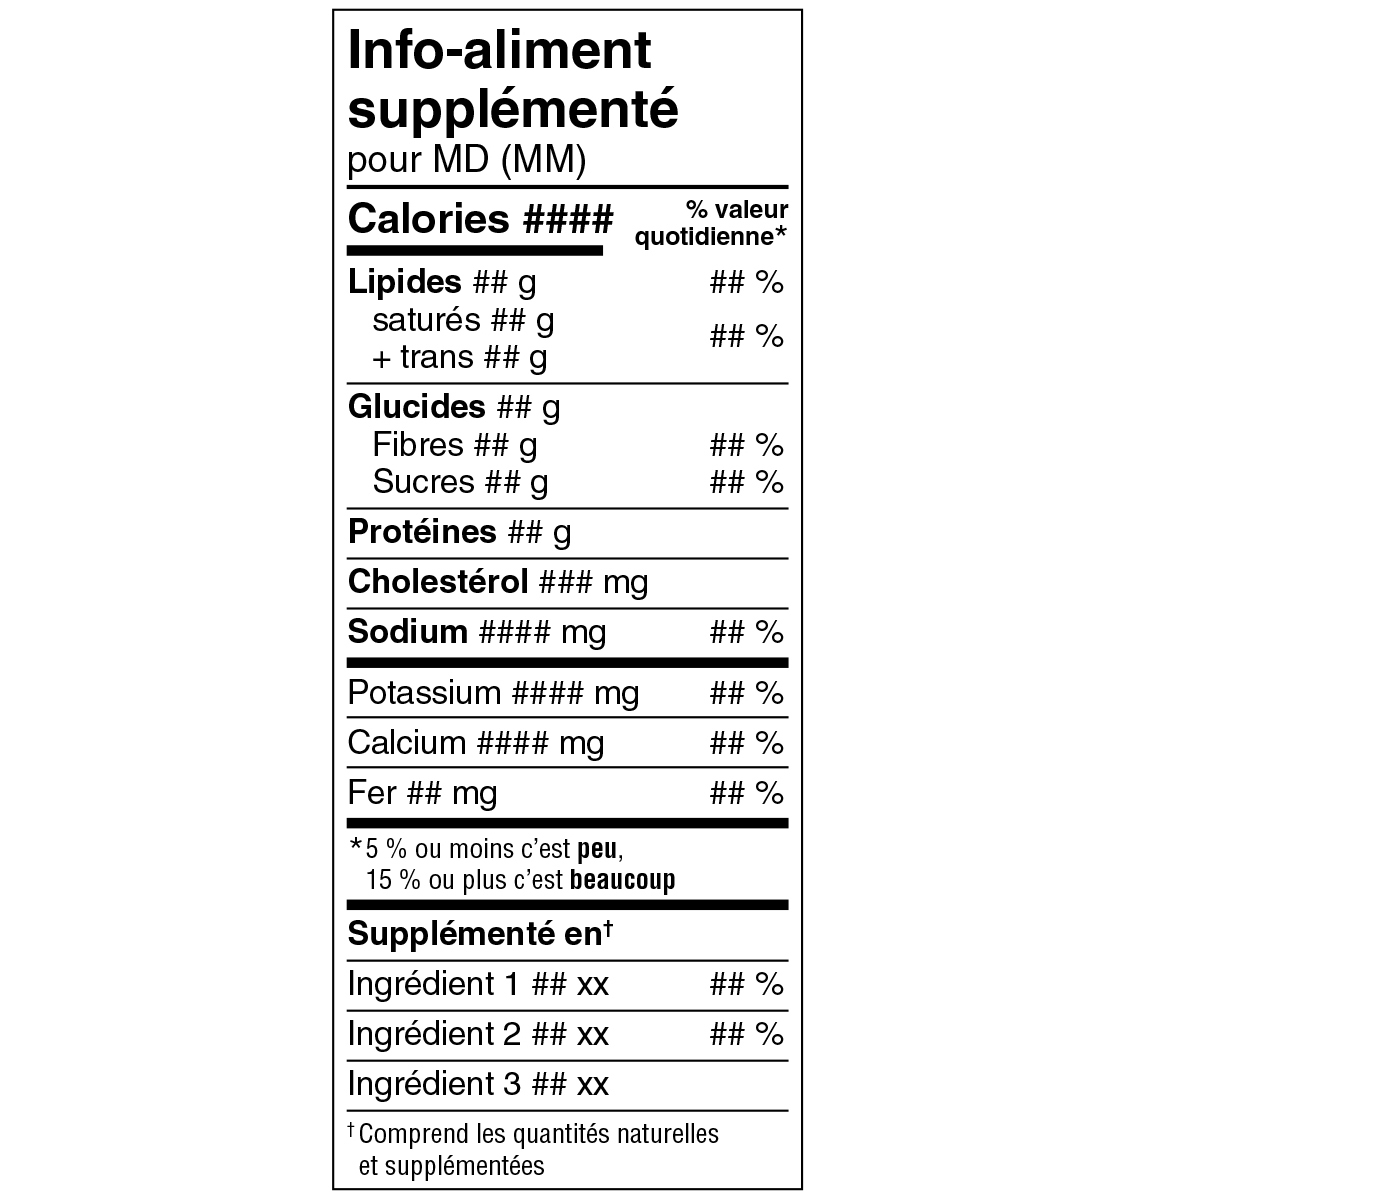 A French Supplemented Food Facts table in narrow standard format surrounded by specifications. Text version below.